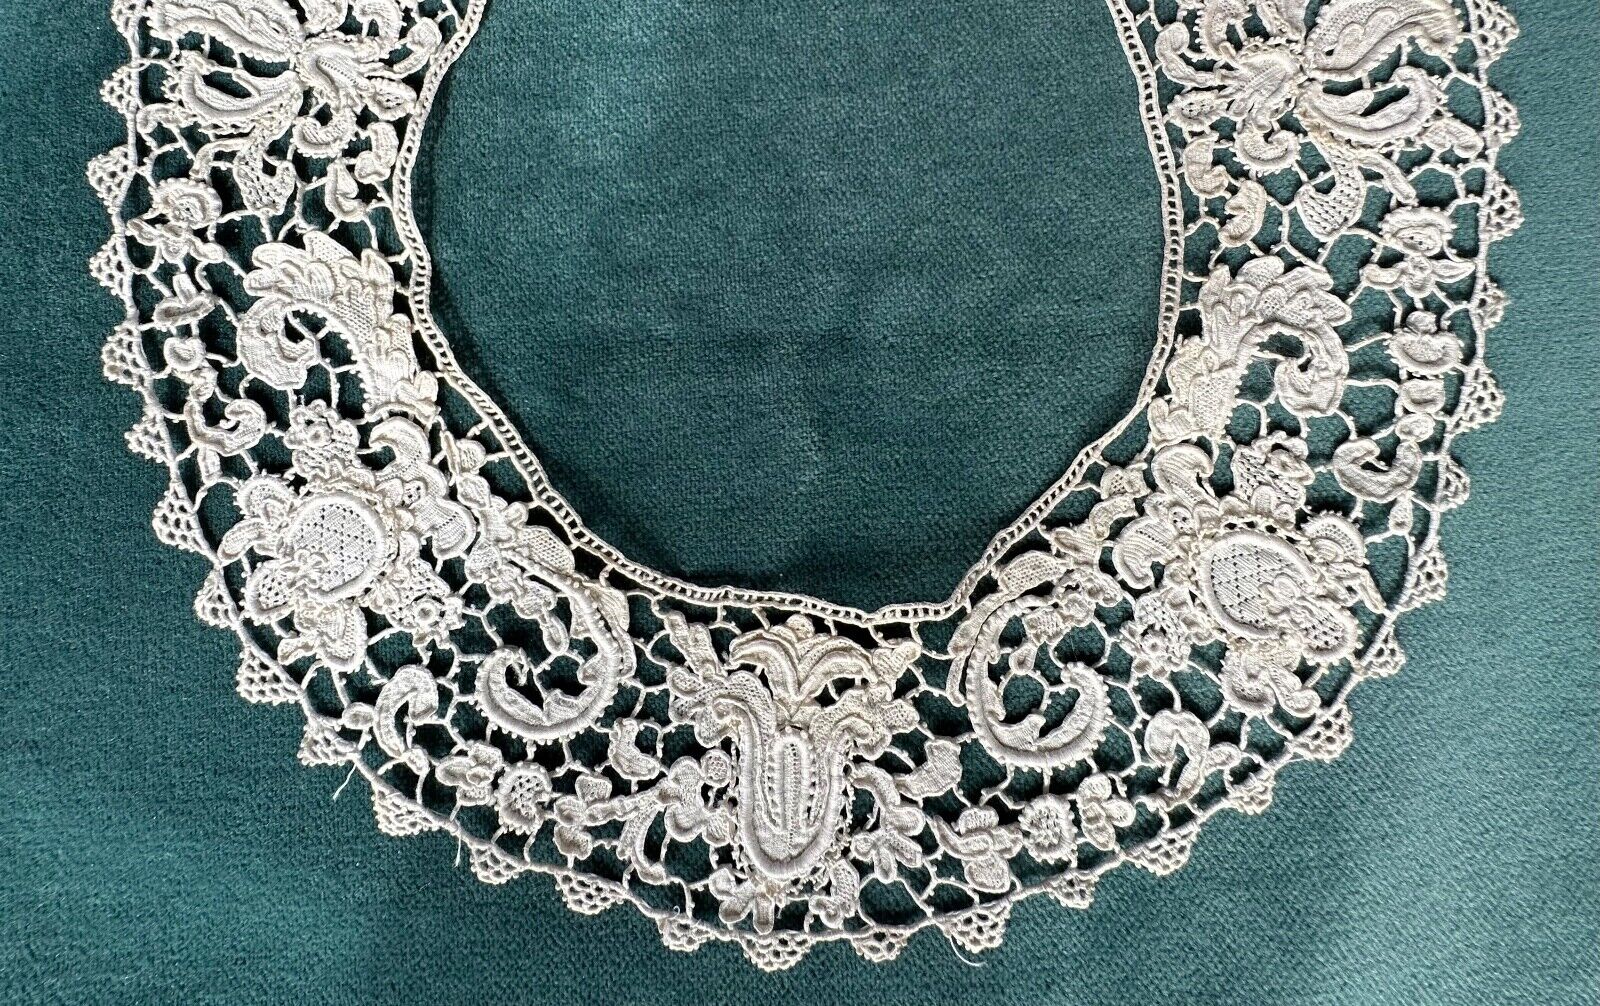 19th C. Gros Point needle lace 19th c. small round collar  COLLECTOR costume